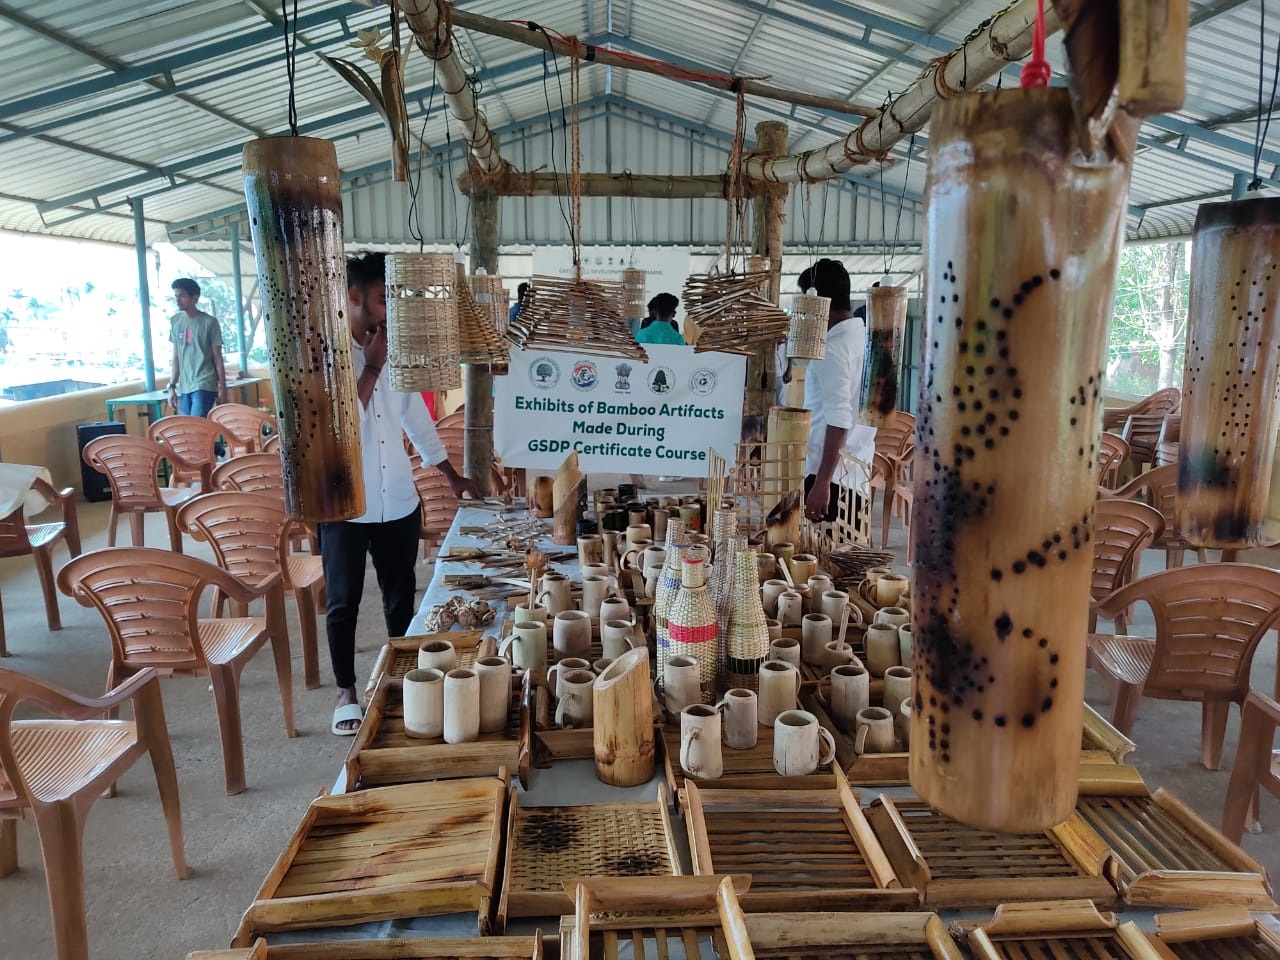 Exhibits of Bamboo Artefacts made during GSDP Course